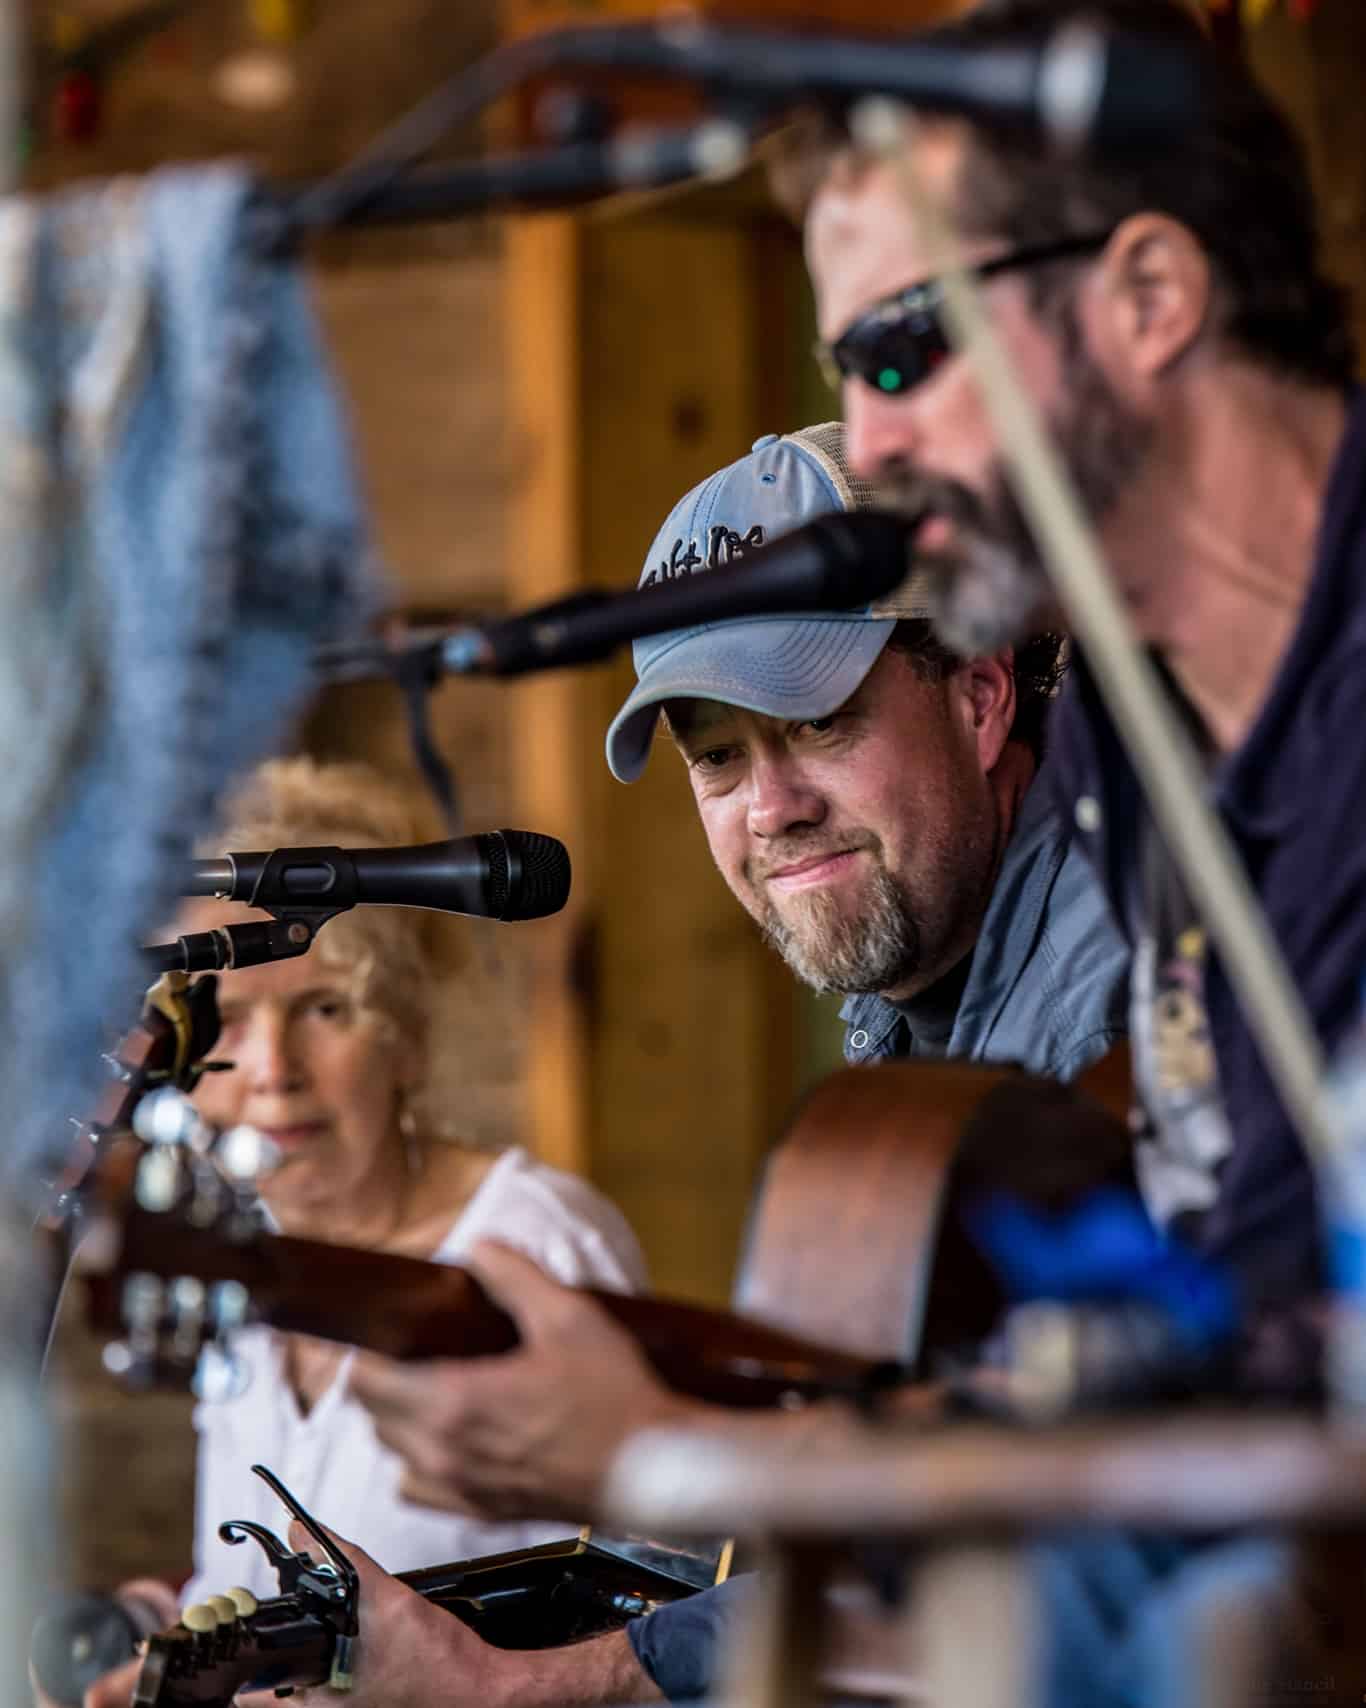 Live Music with The Southern Rambler | The Frog Pond Sunday Social